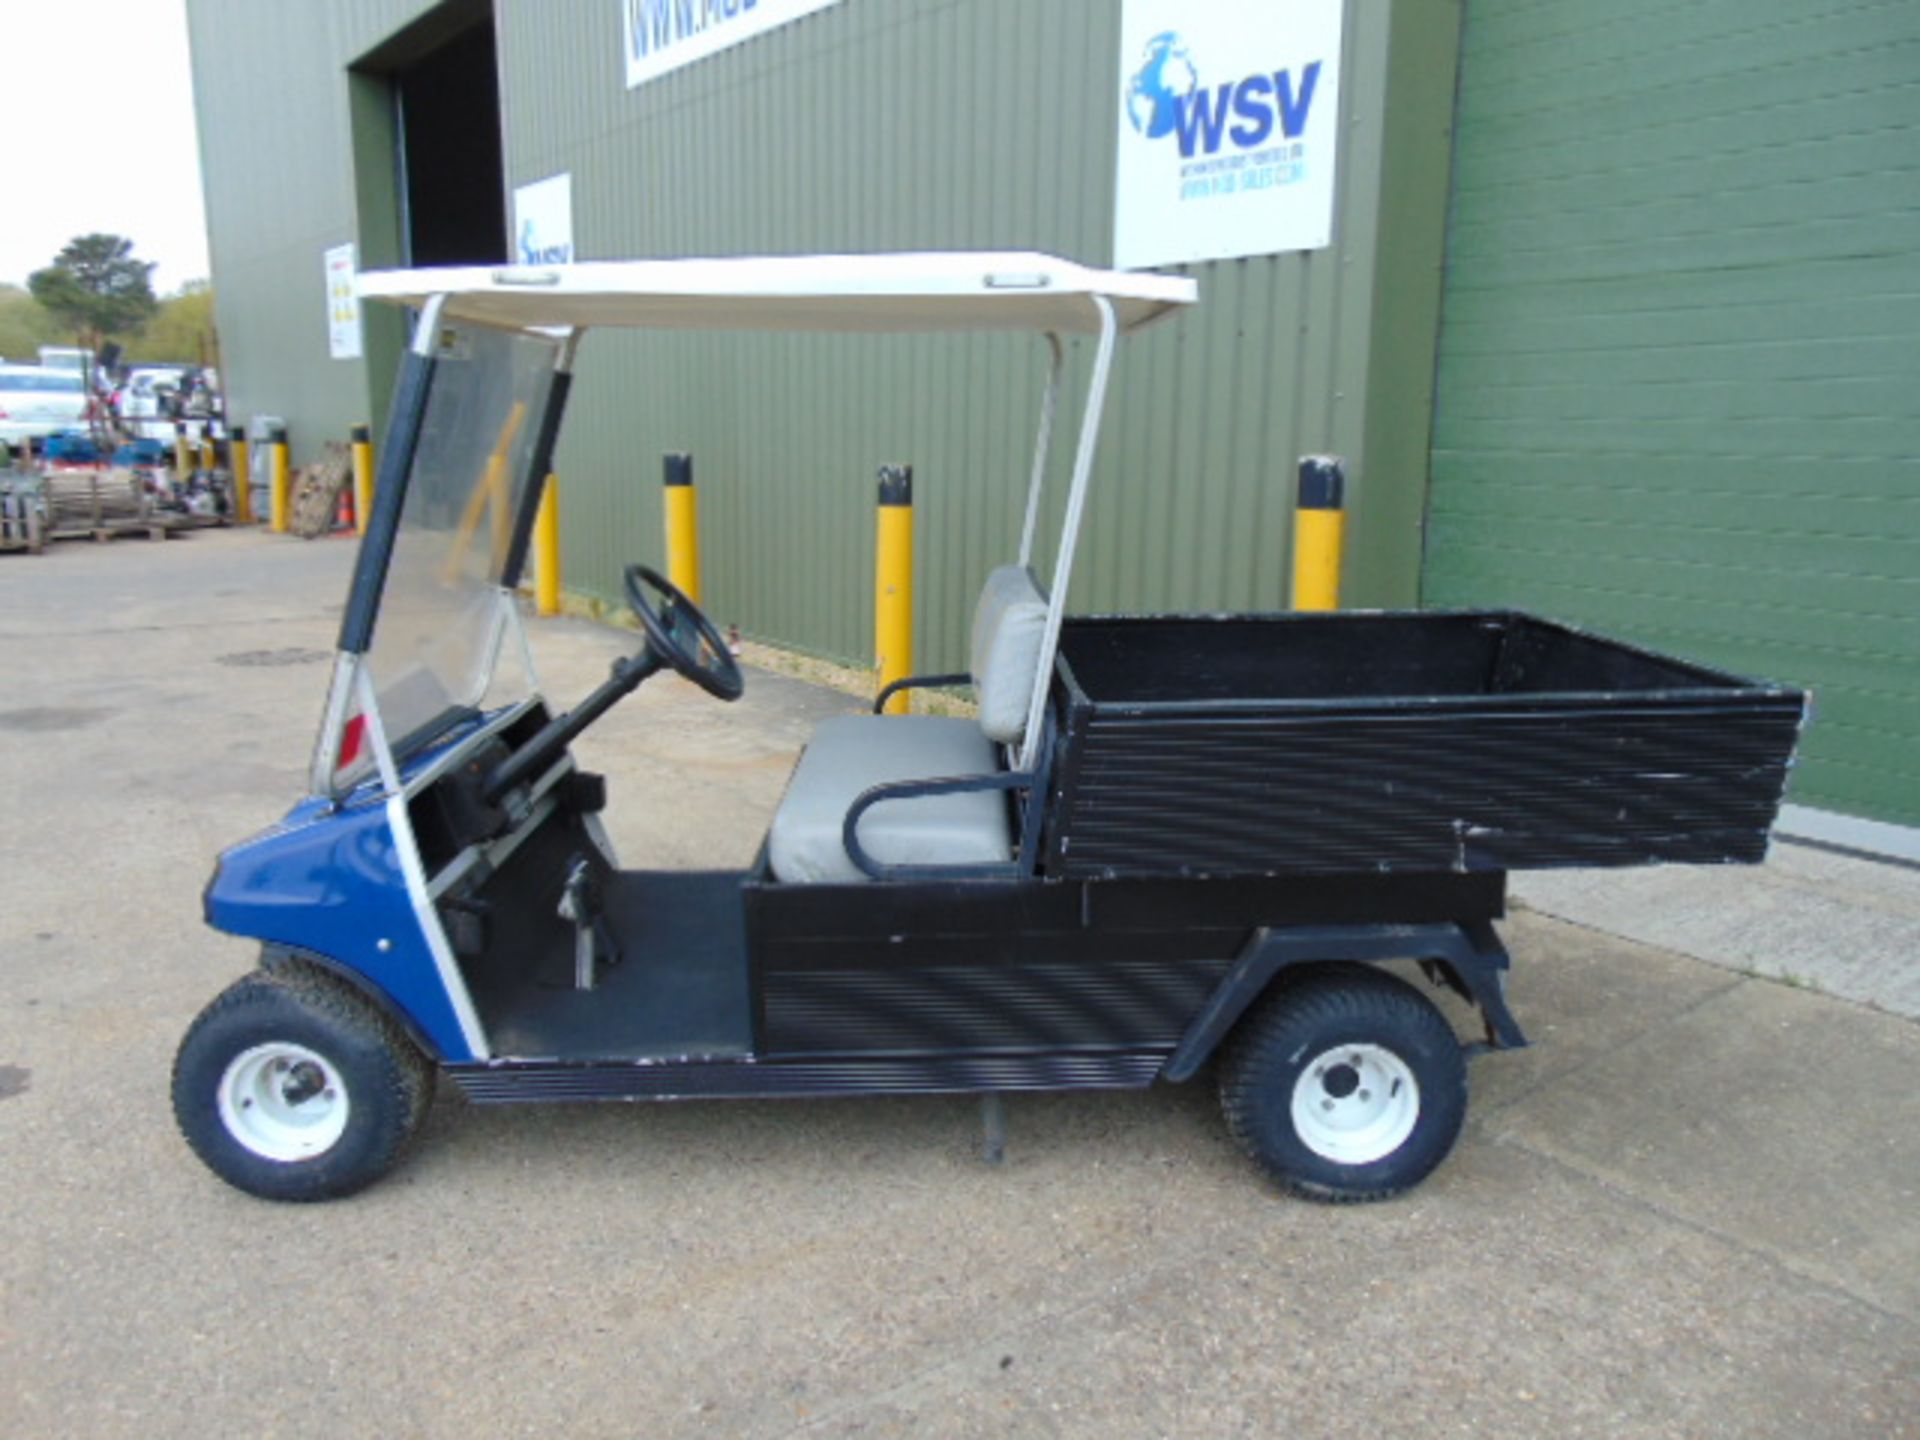 Club Car 2 Seater Golf Buggy / Estate Vehicle C/W Tipping Rear Body - Image 5 of 13